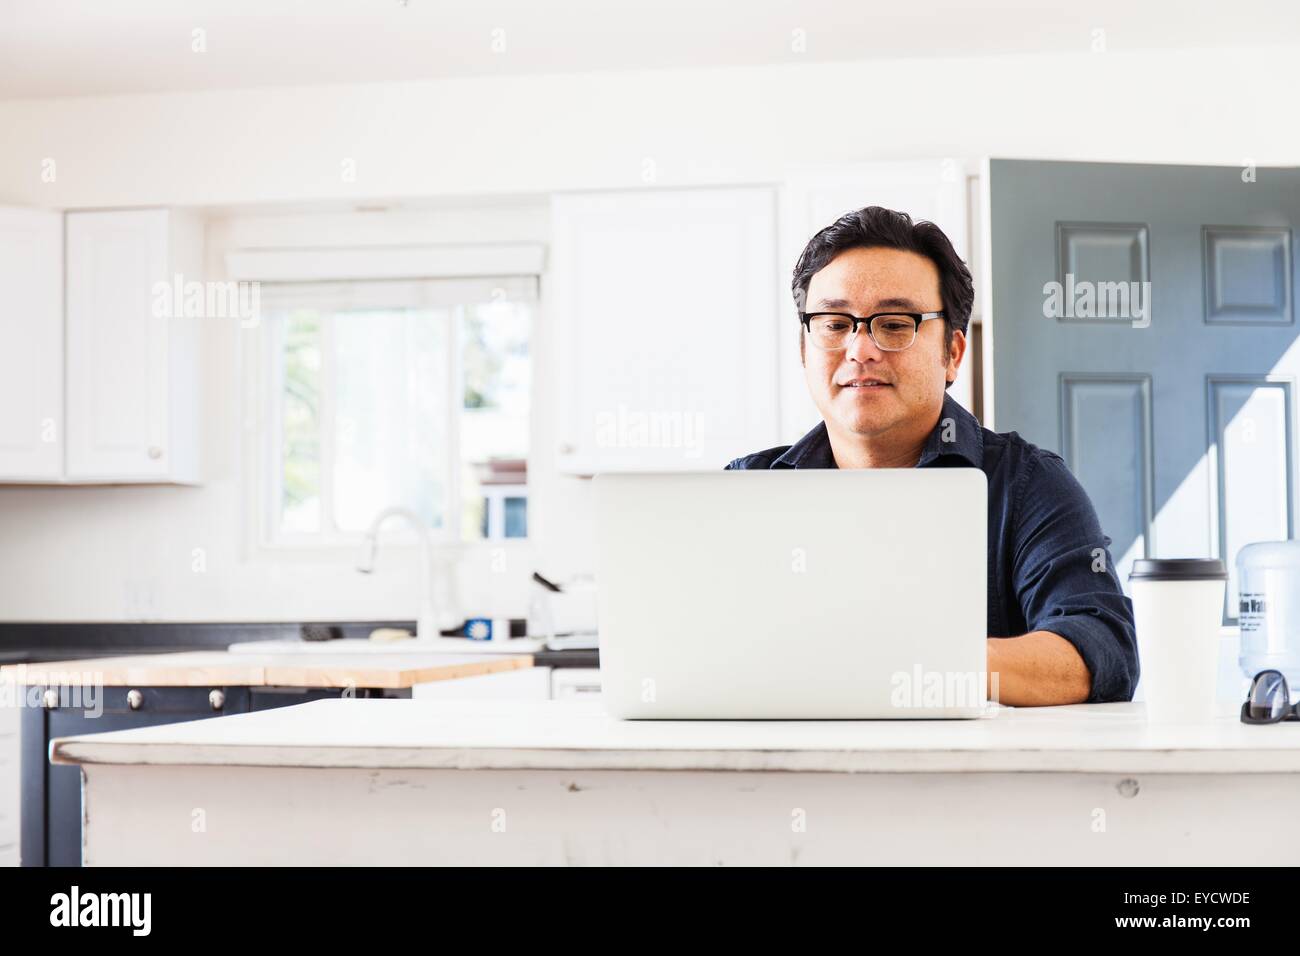 Mature businessman typing on laptop in kitchen Stock Photo